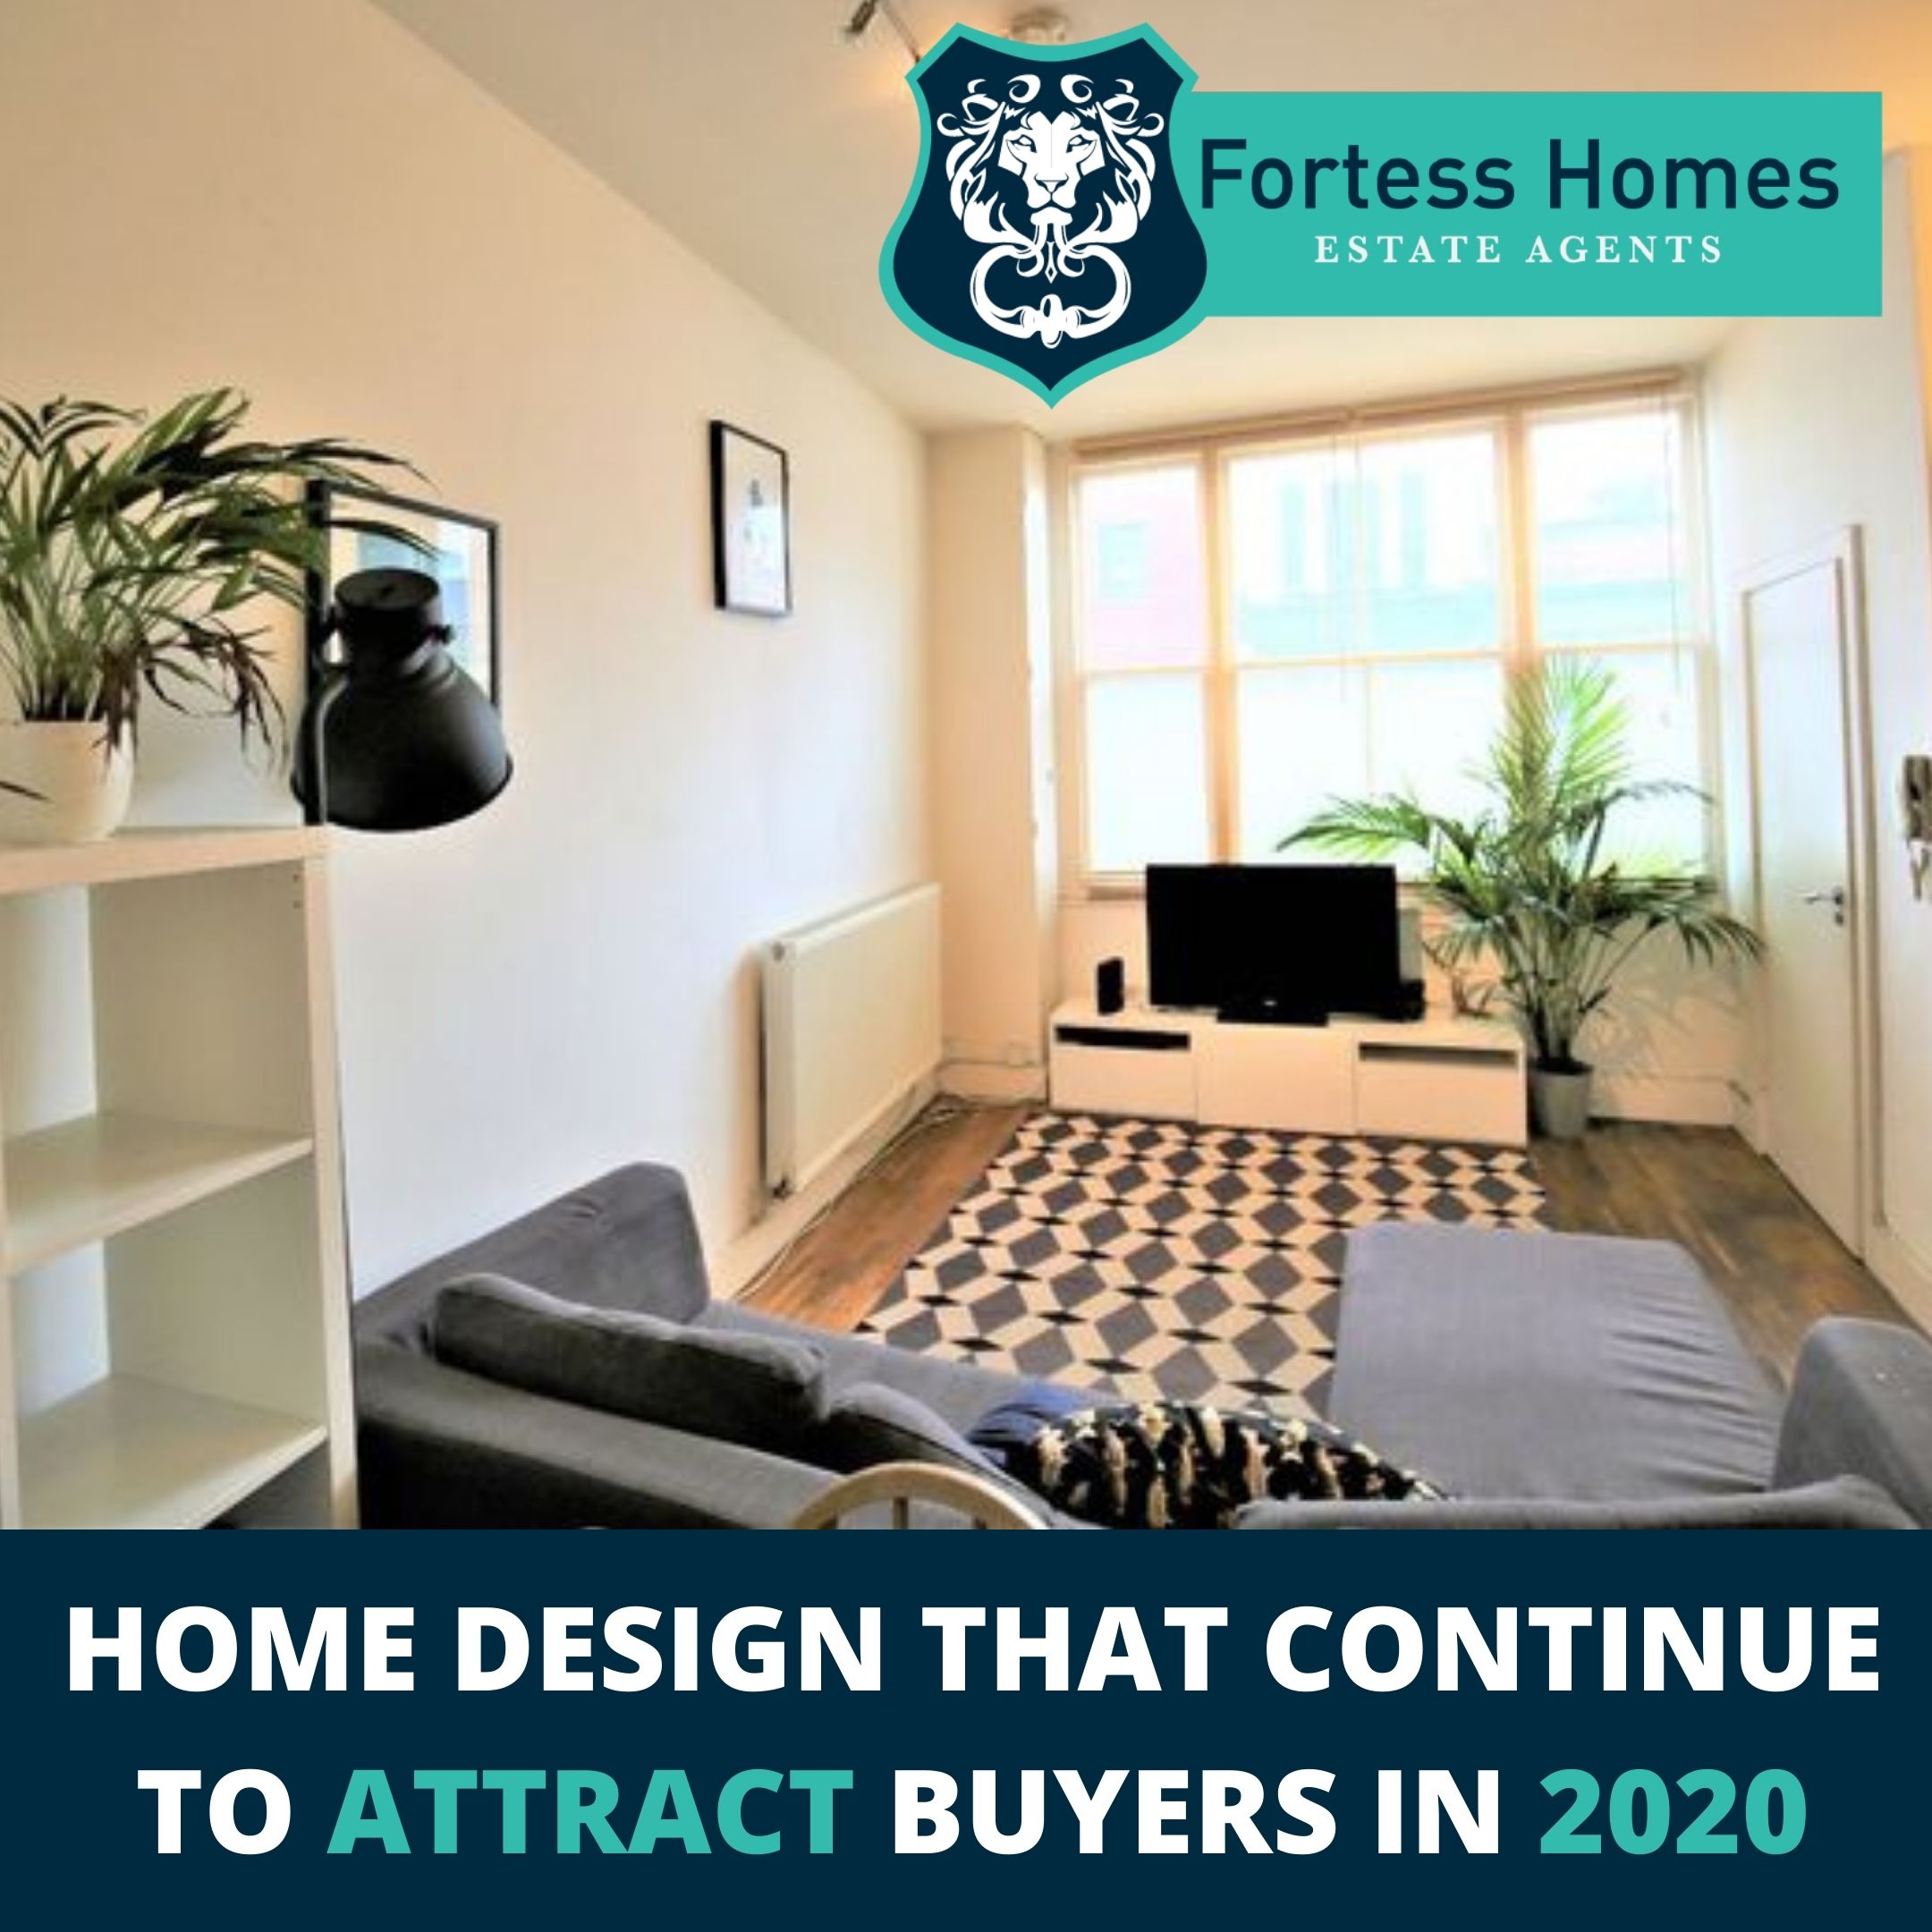 HOME DESIGN THAT CONTINUE TO ATTRACT BUYERS IN 2020